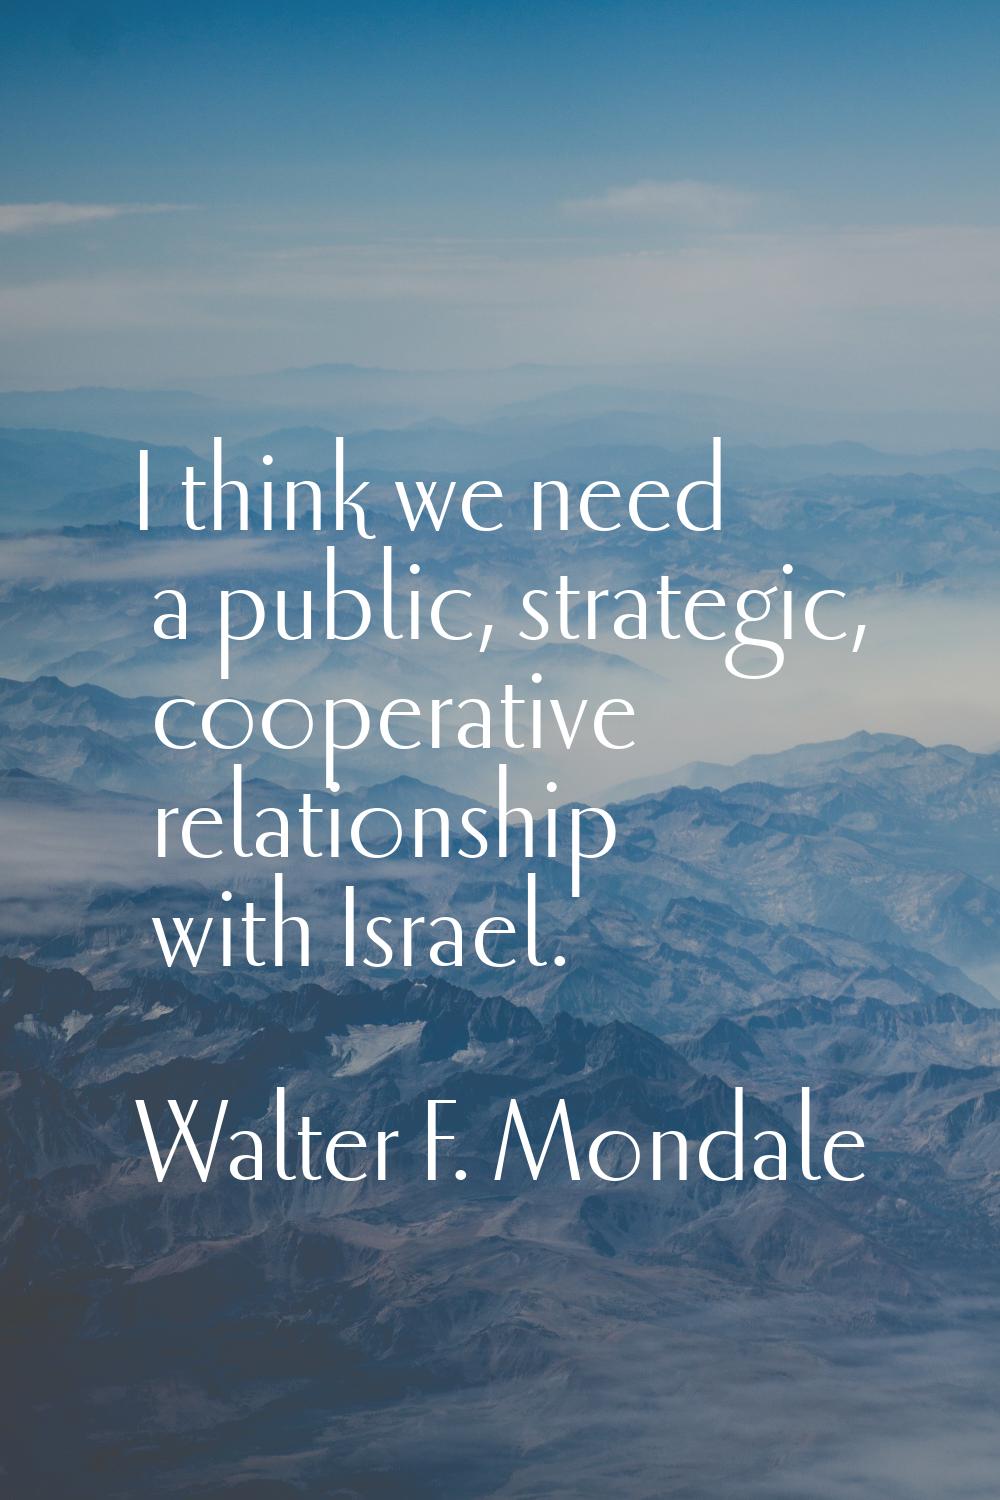 I think we need a public, strategic, cooperative relationship with Israel.